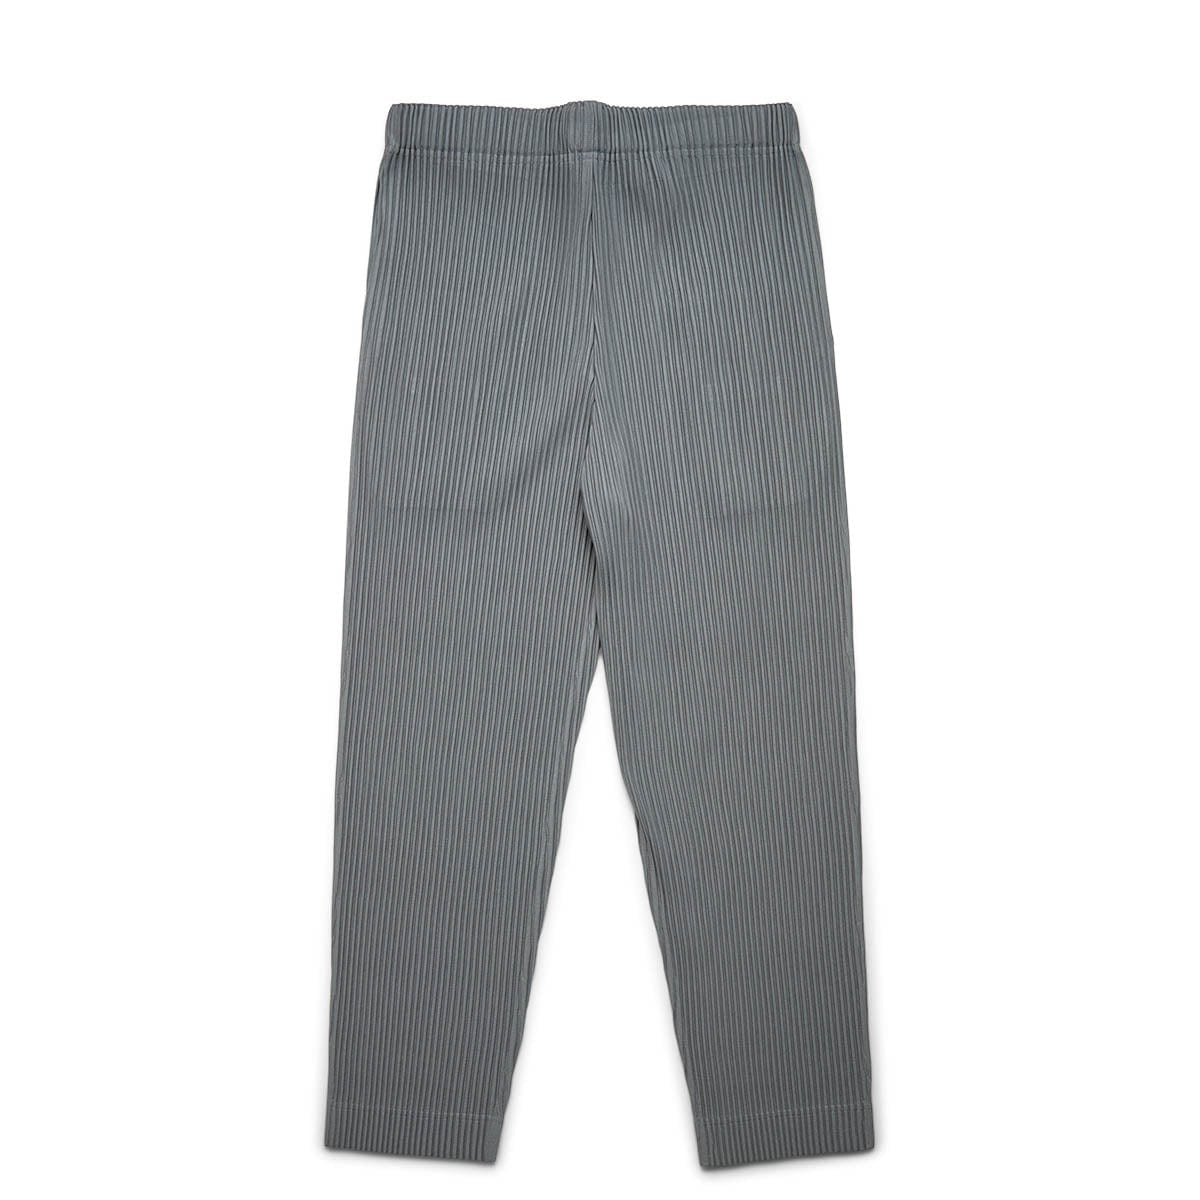 Homme Plissé Issey Miyake Bottoms PLEATED TROUSERS